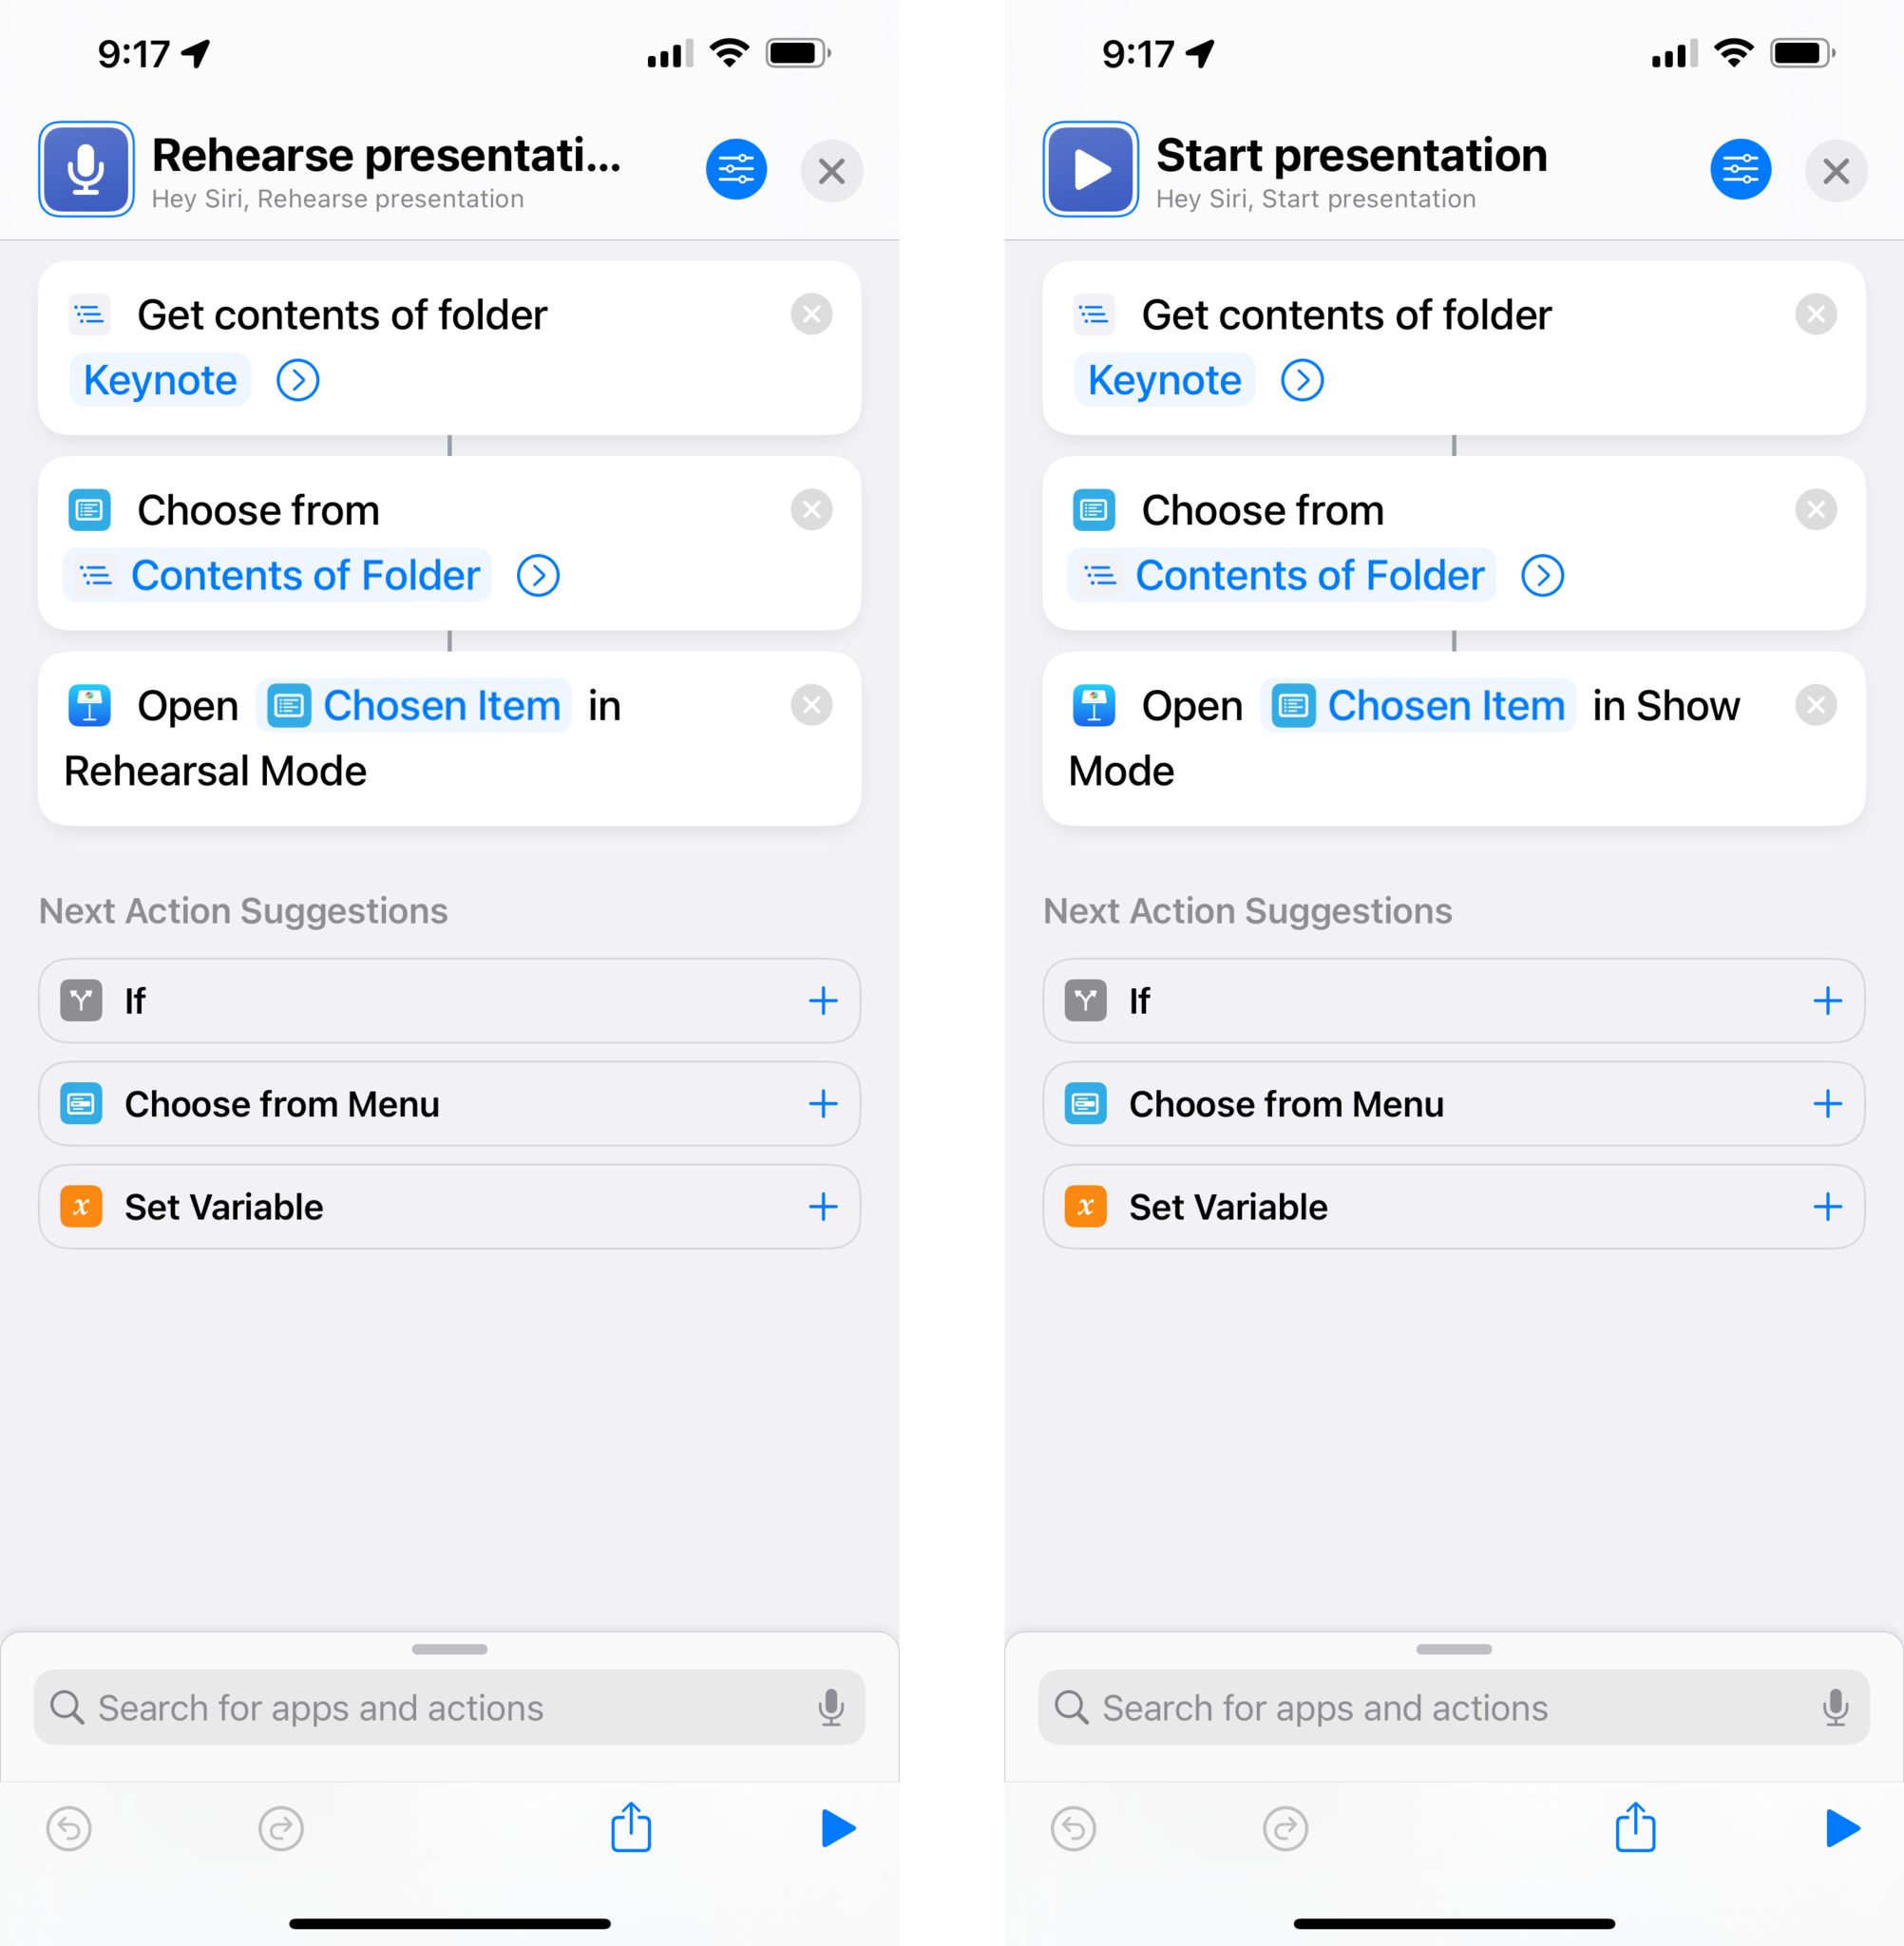 Screenshot of the Rehearsal Mode and Show Mode actions for Keynote in Shortcuts.